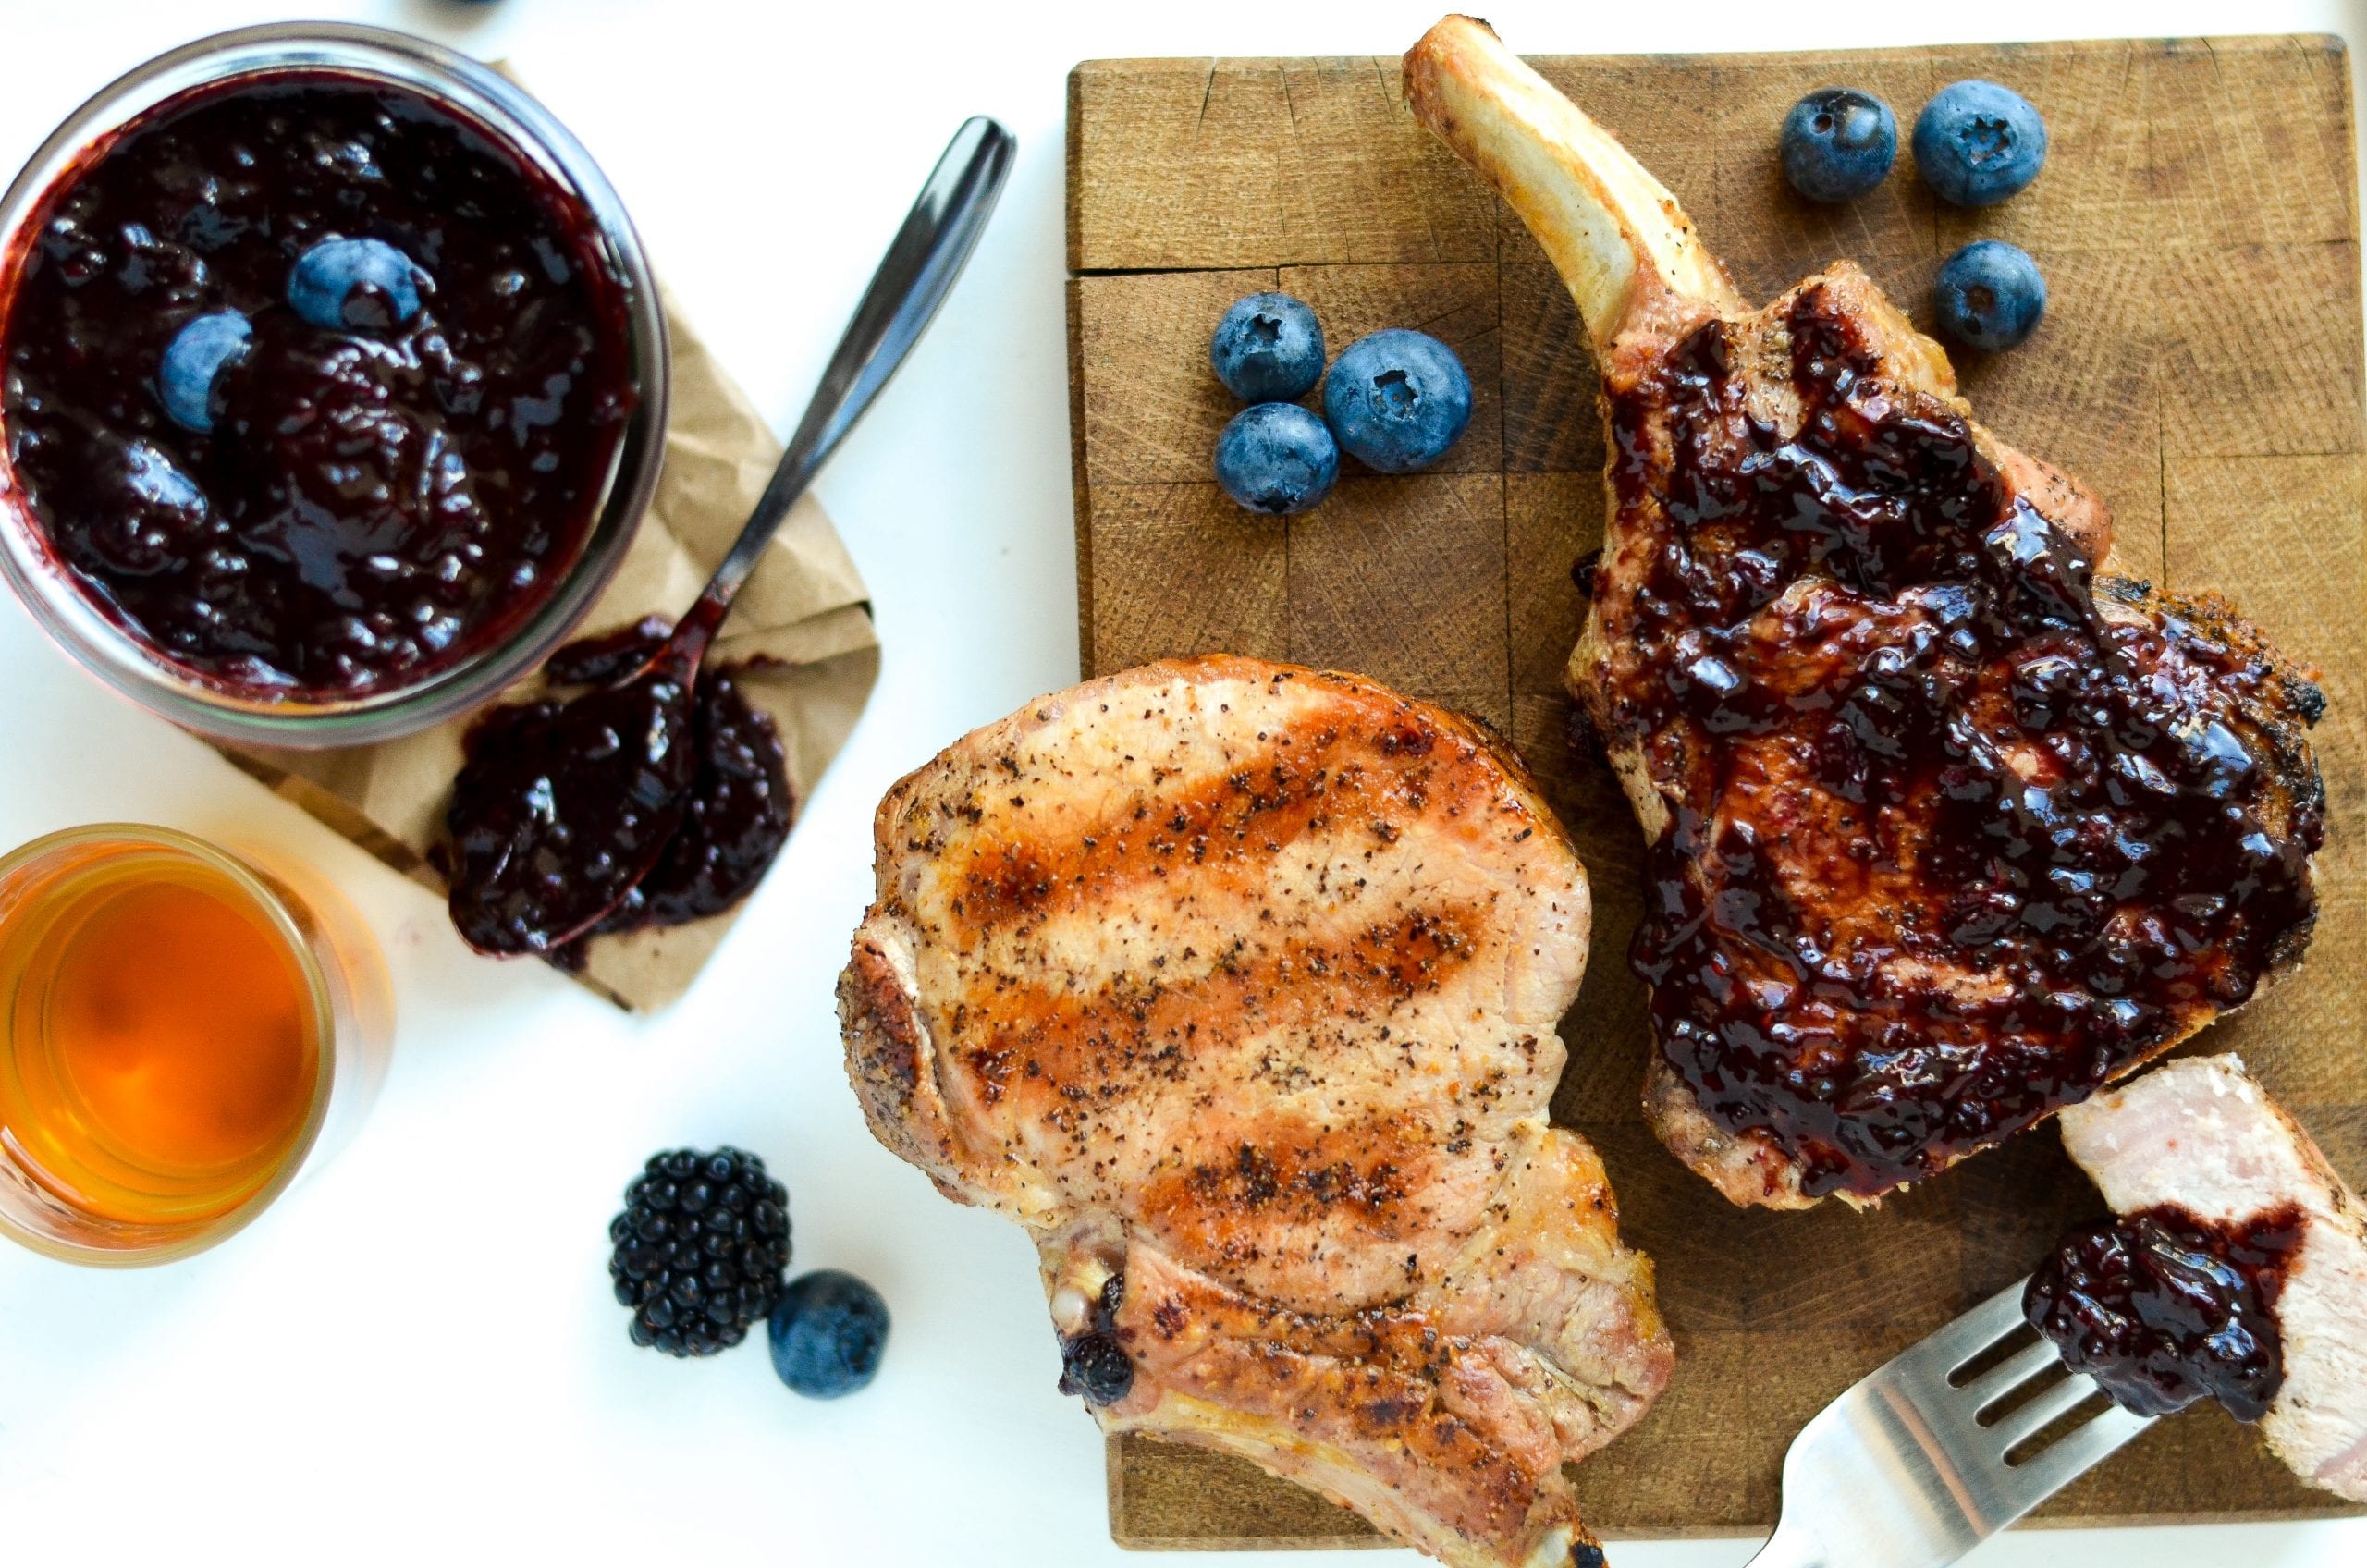 Grilled Pork Chops with Bourbon Berry BBQ Sauce